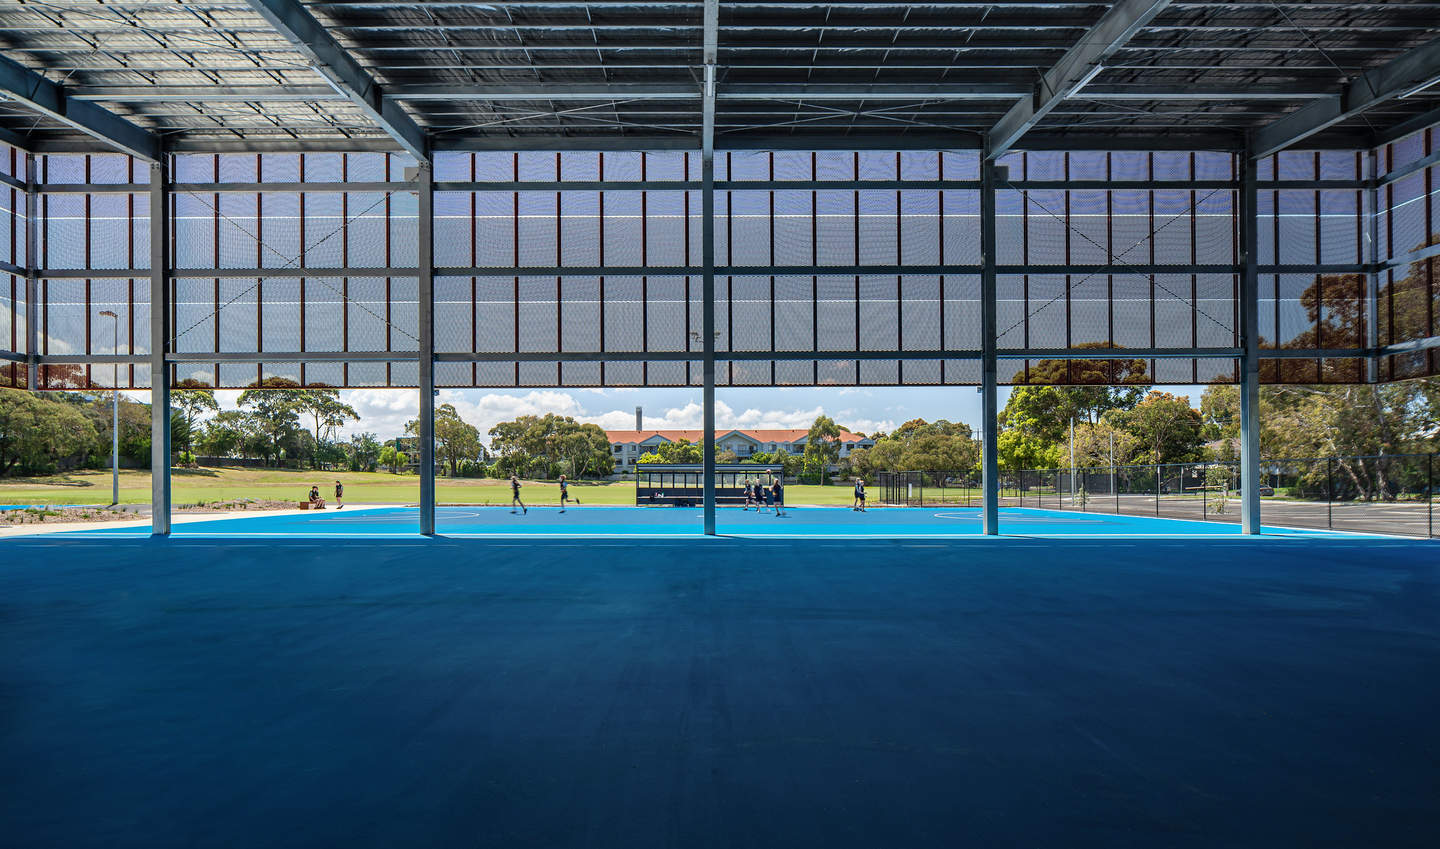 Outside courts at new netball centre.